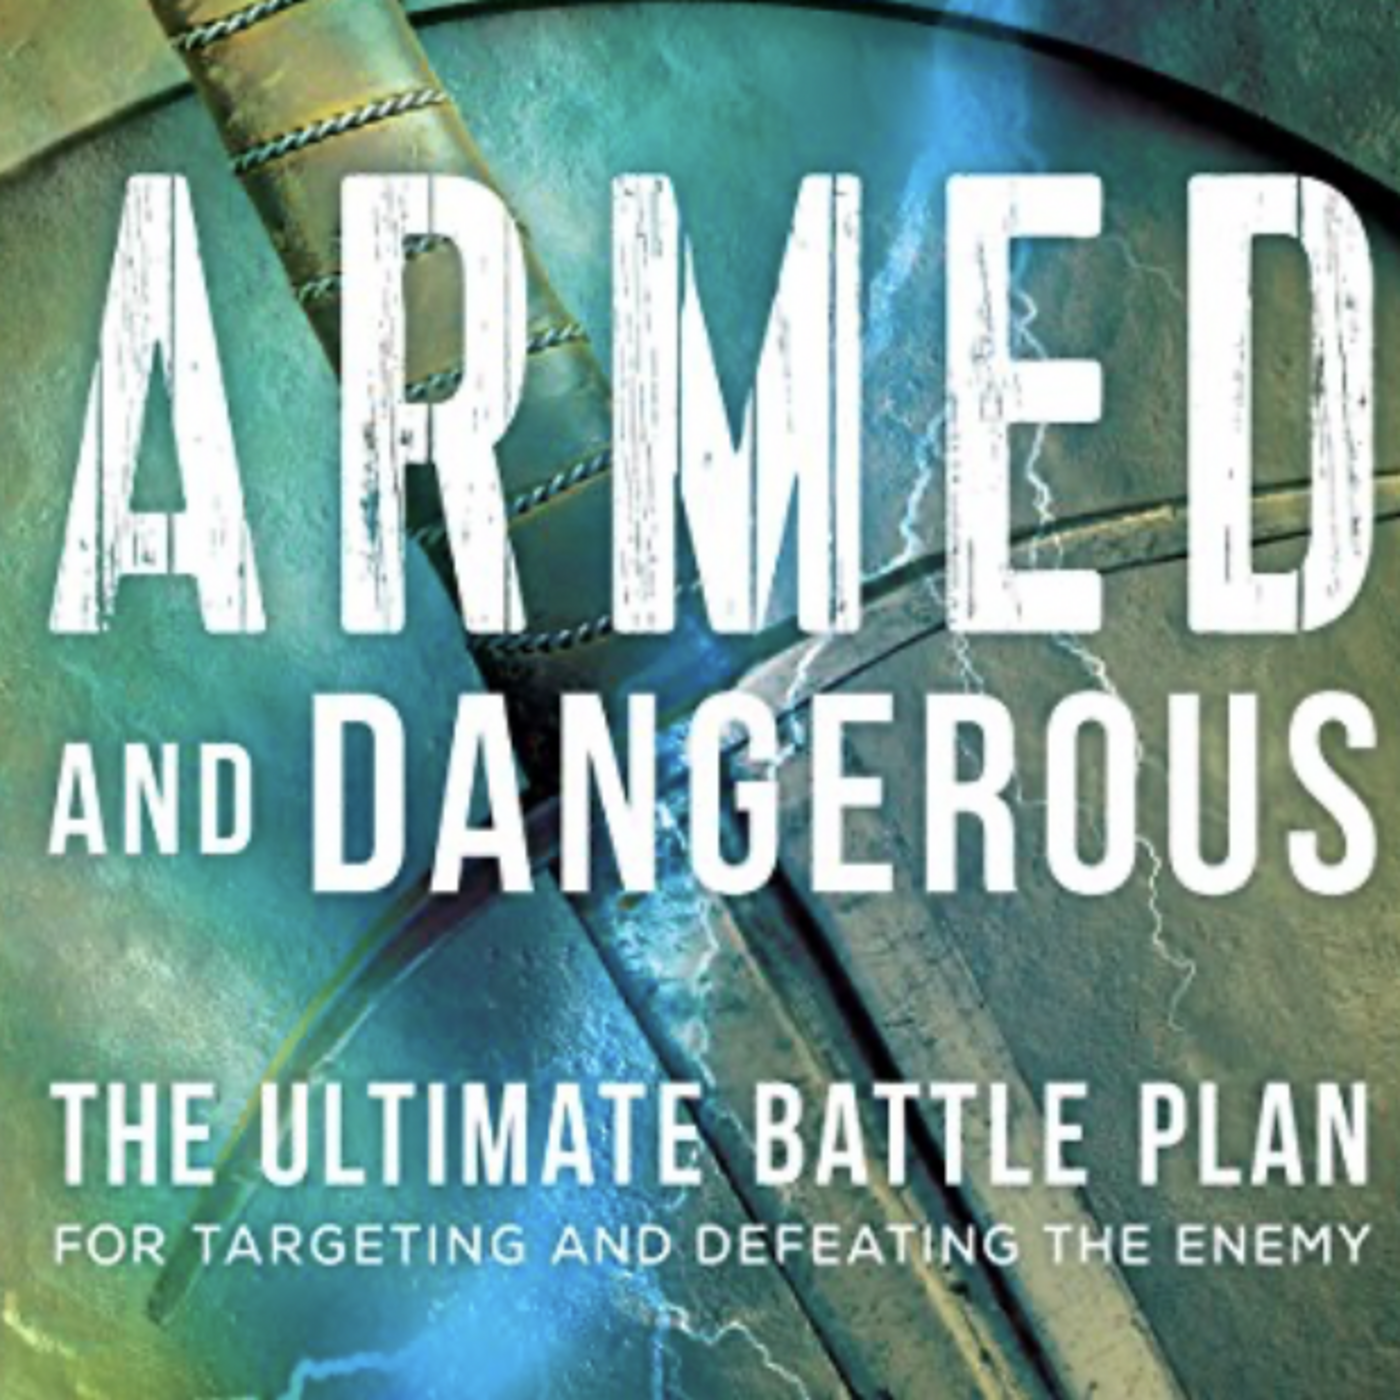 Armed and Dangerous: The Ultimate Battle Plan For Defeating the Enemy